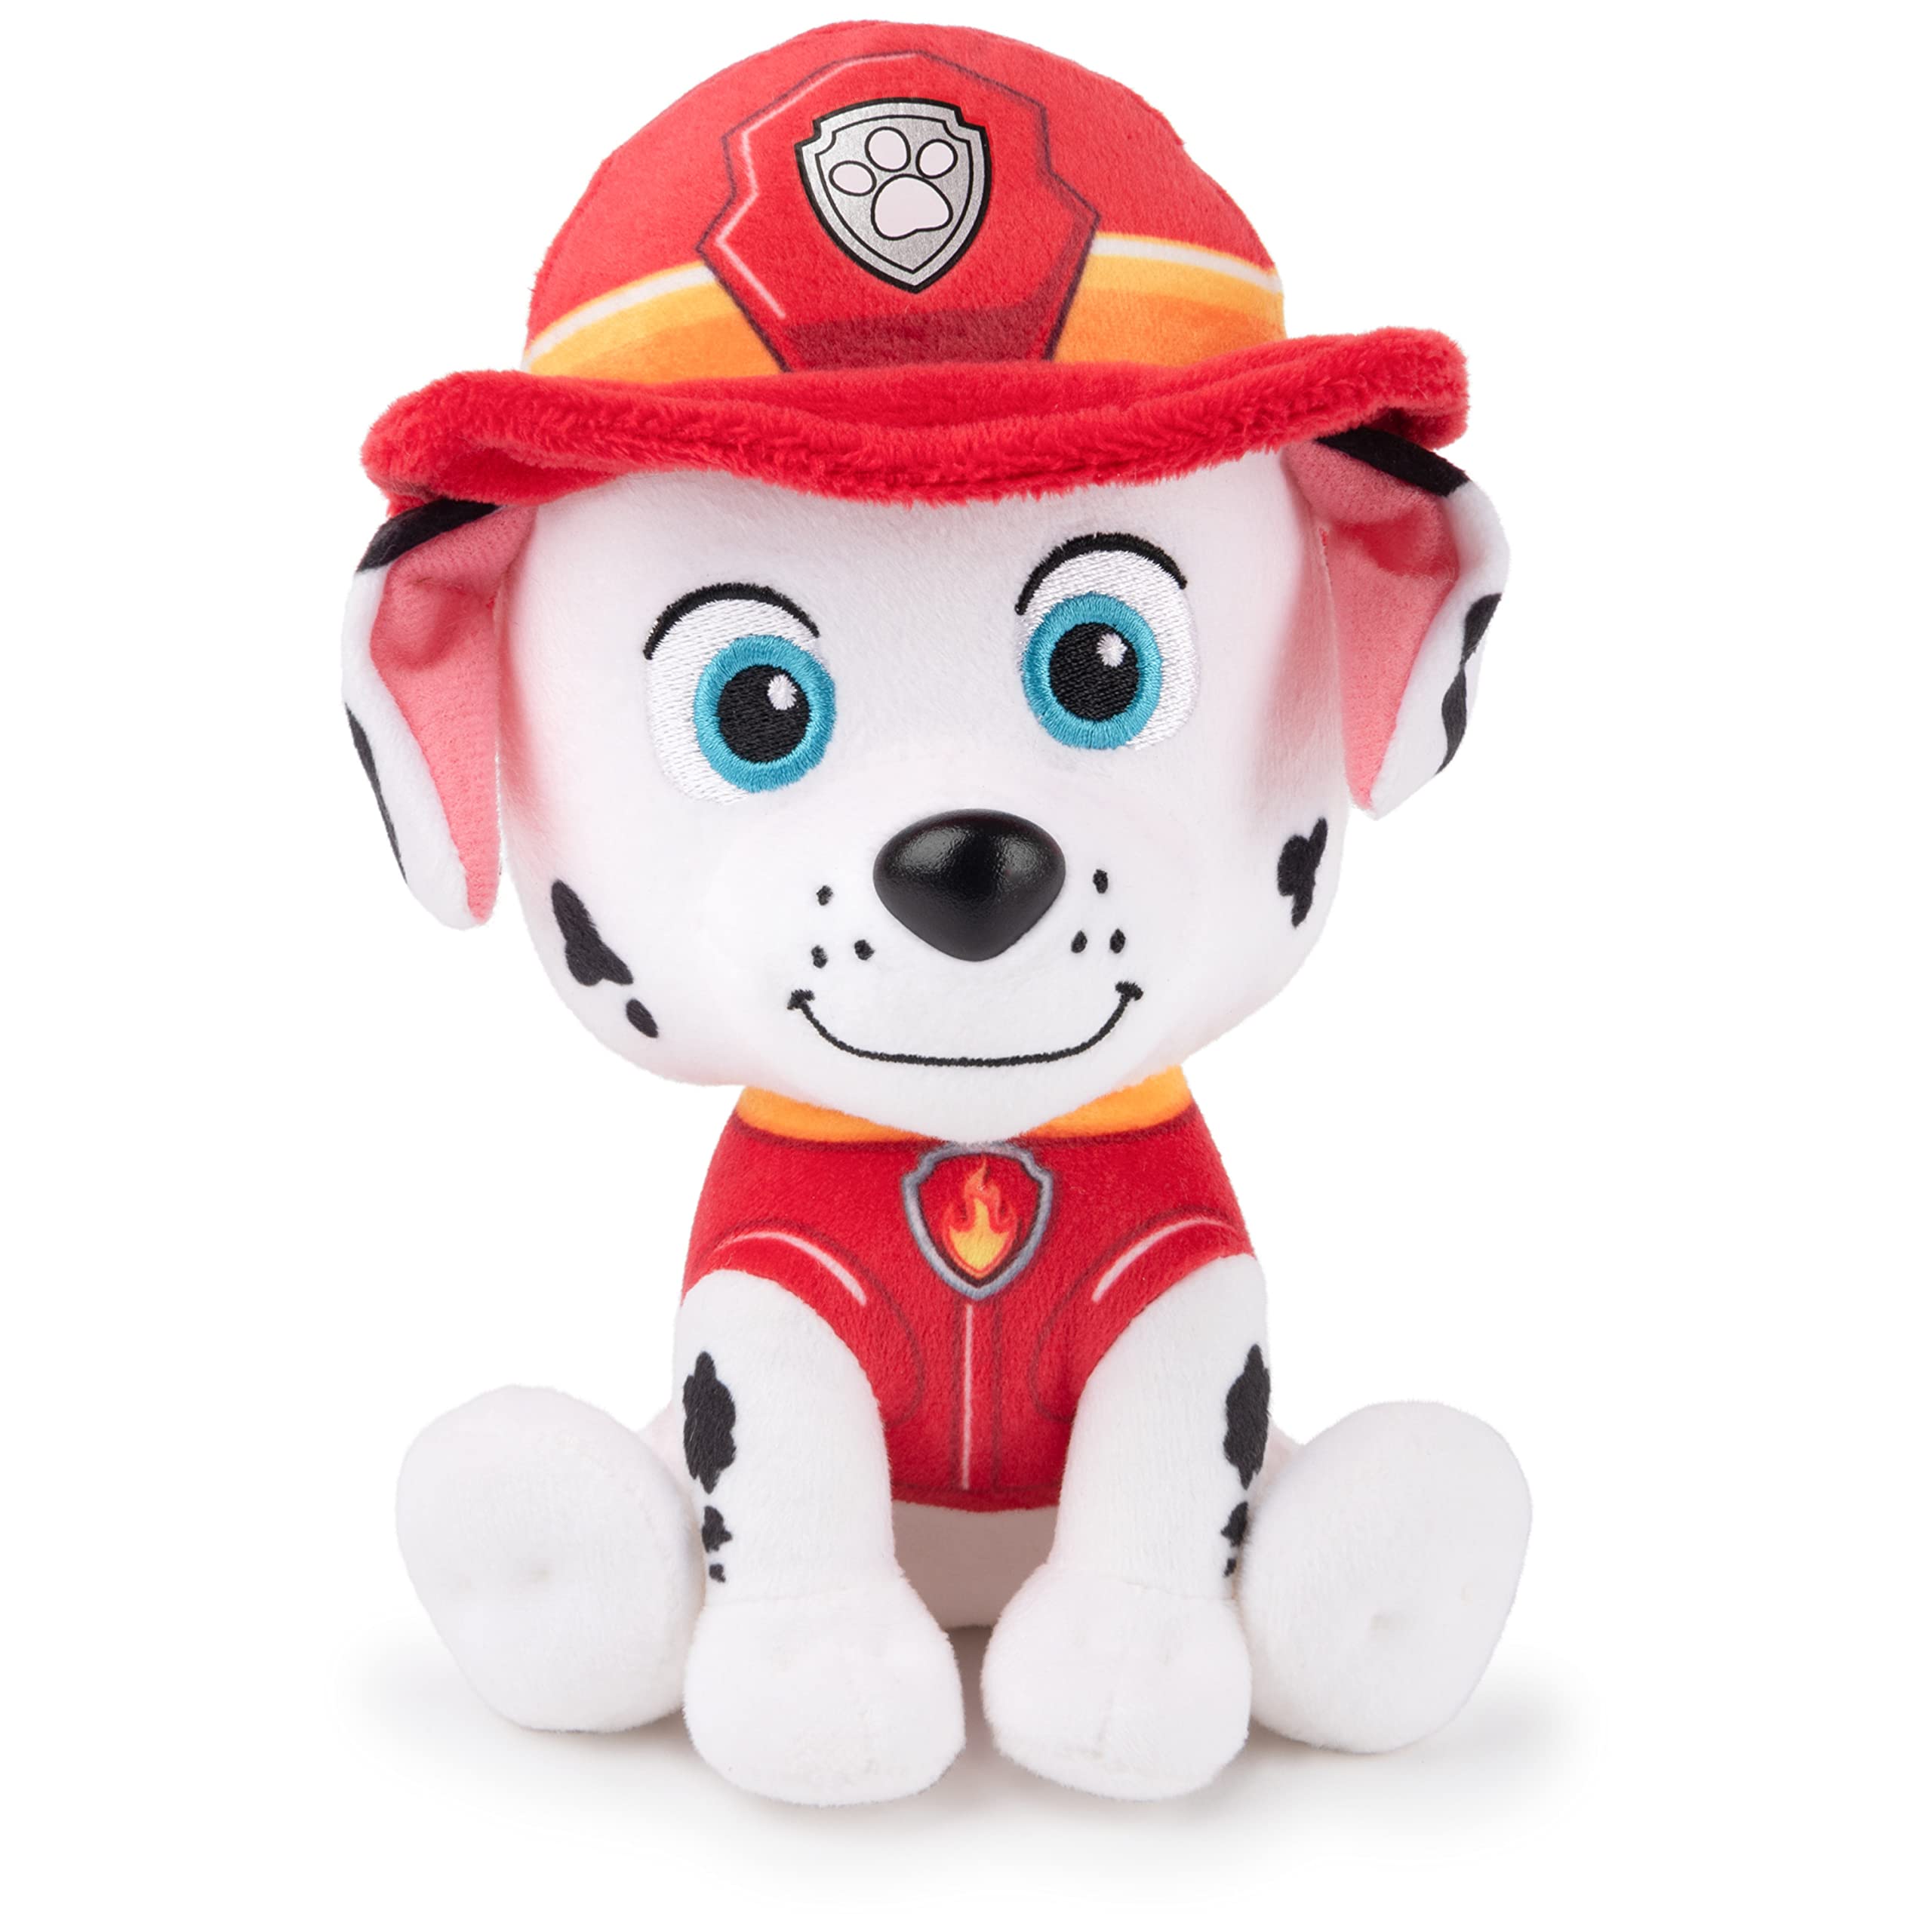 6" Gund Official Paw Patrol Plush Toys (Marshall, Rubble, Skye) $8 + Free Shipping w/ Prime or on $25+